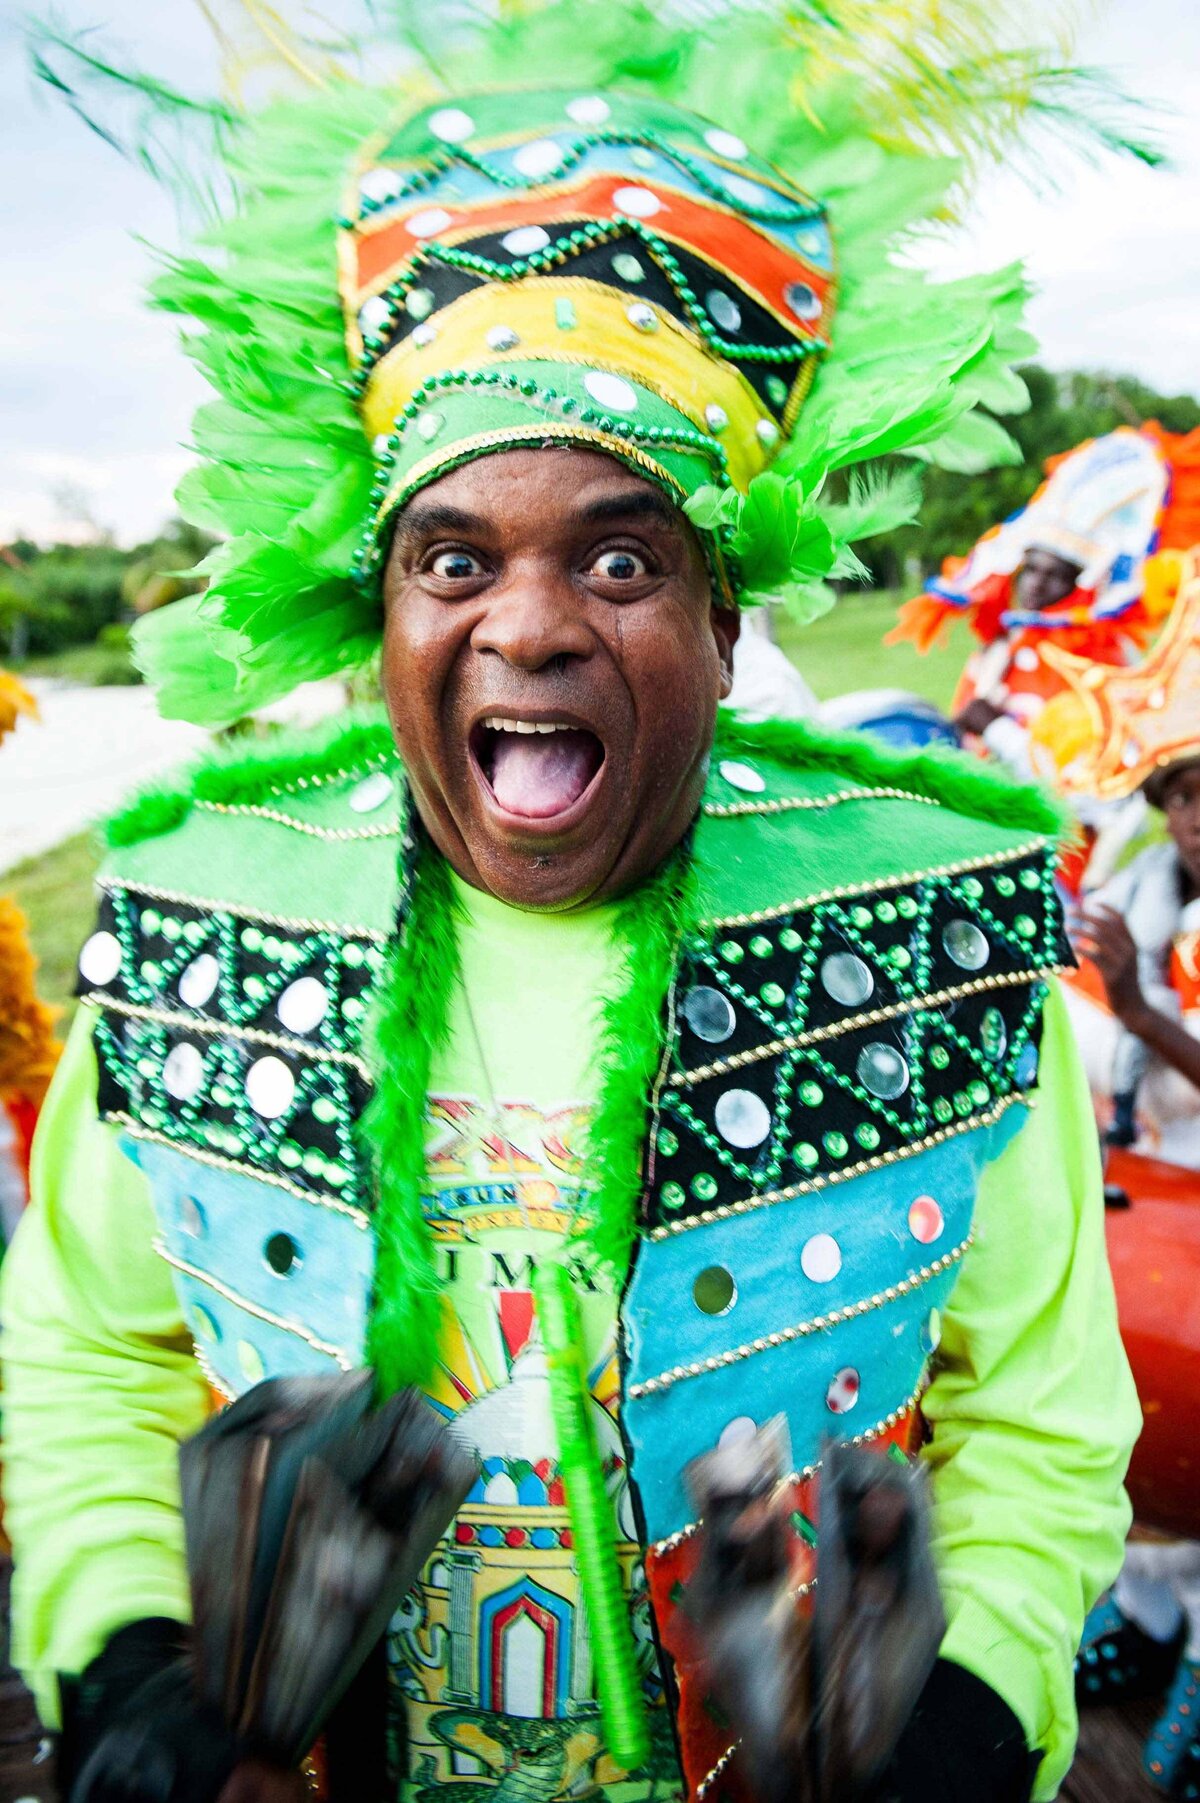 A man dressed in an ornate  Junkanoo outfit dances and sings at celebration. Harbour Island Bahamas